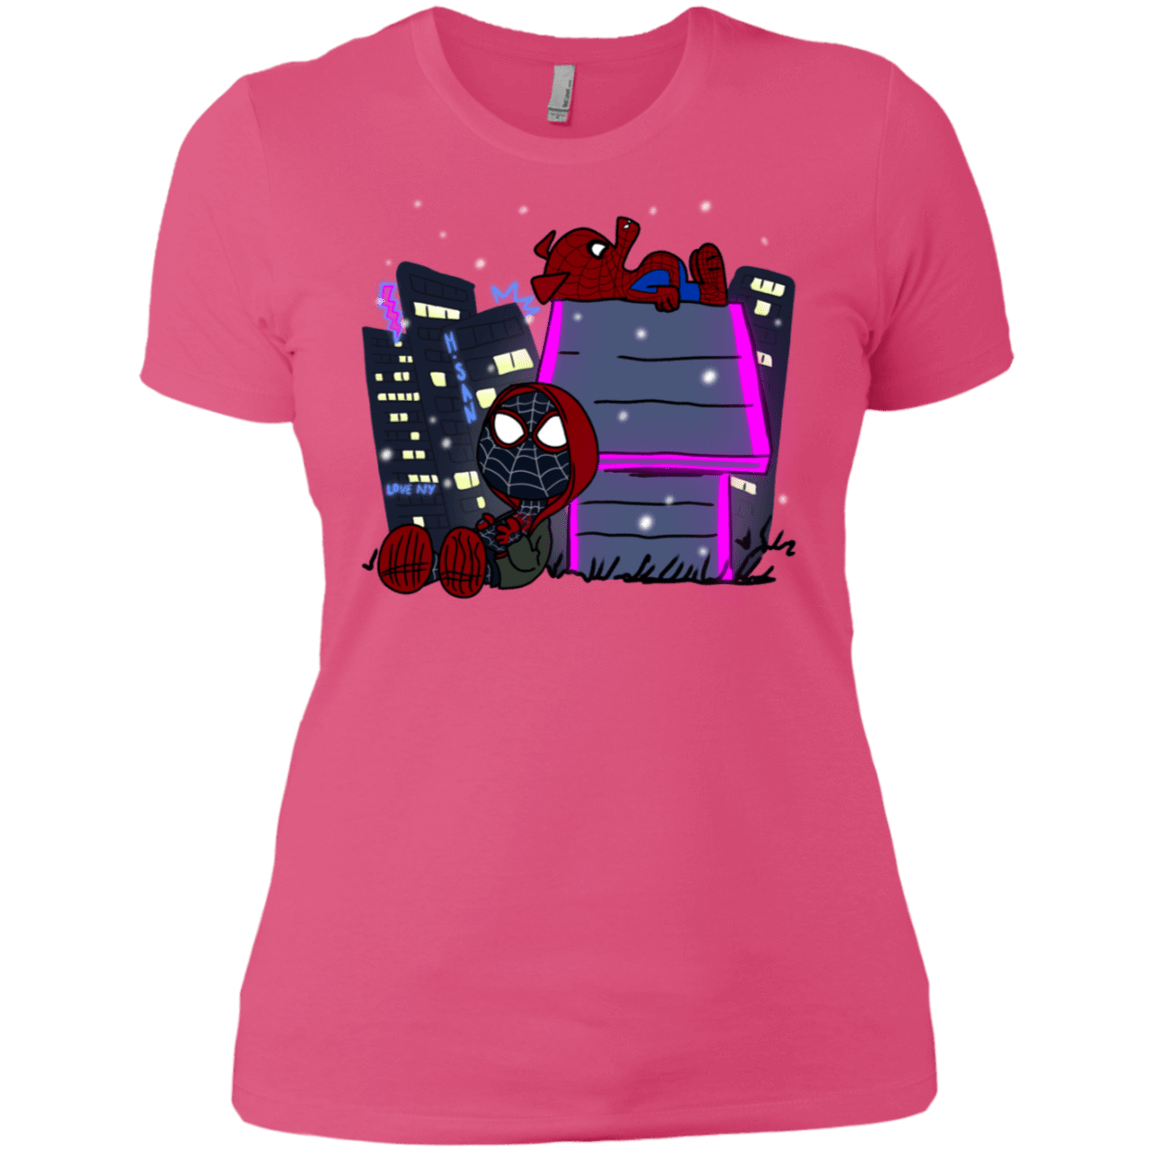 T-Shirts Hot Pink / X-Small Miles and Porker Women's Premium T-Shirt